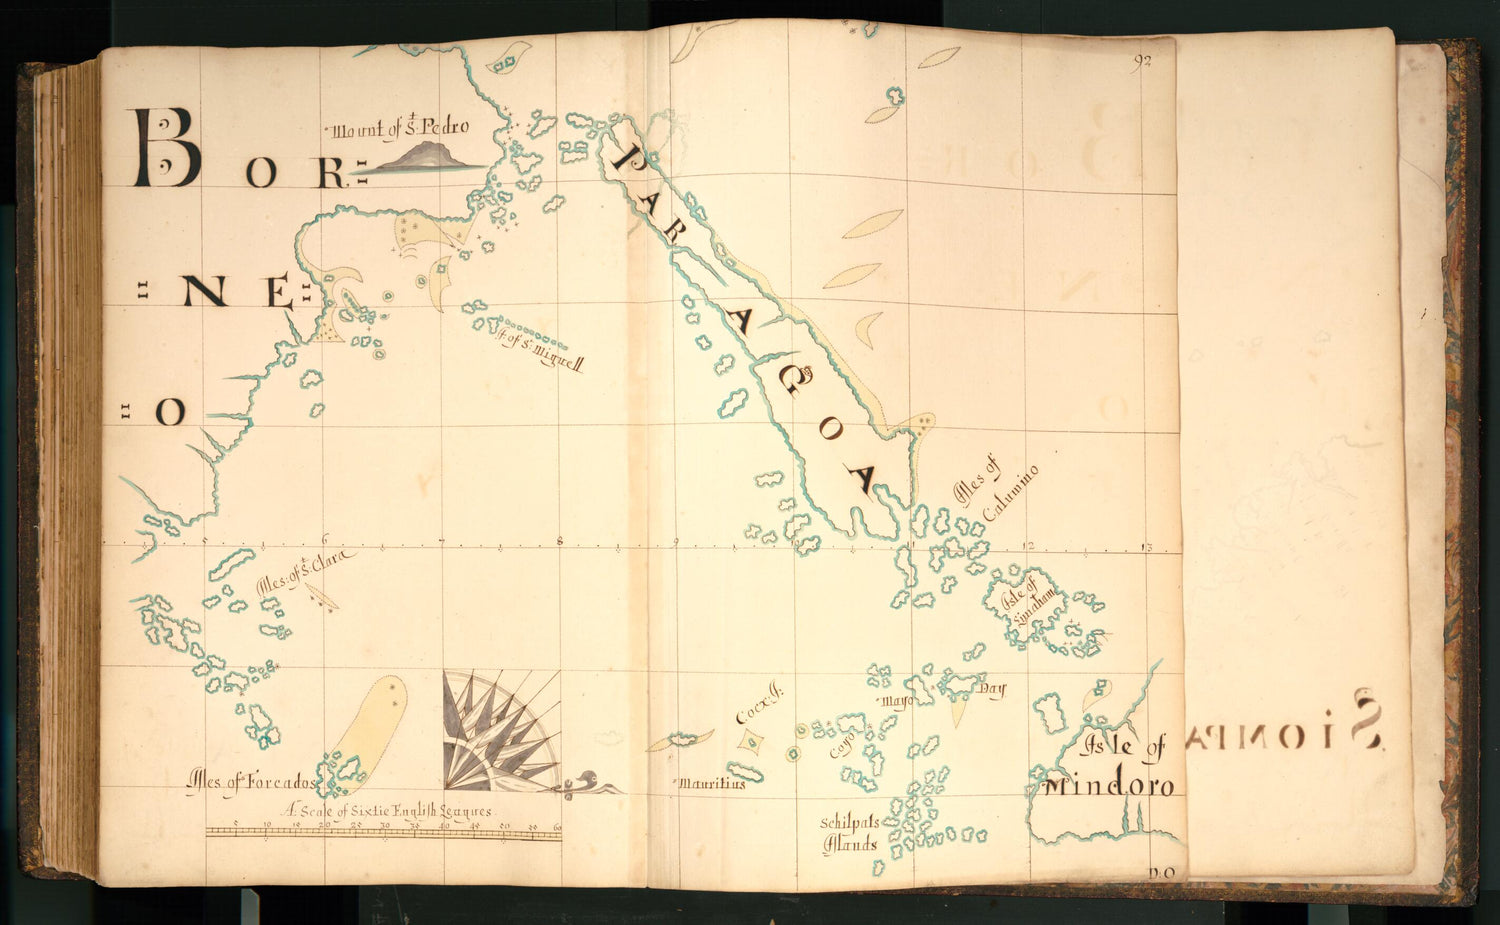 This old map of 92) Borneo, Paragoa, Isle of Mindoro from Buccaneer Atlas from 1690 was created by William Hacke in 1690